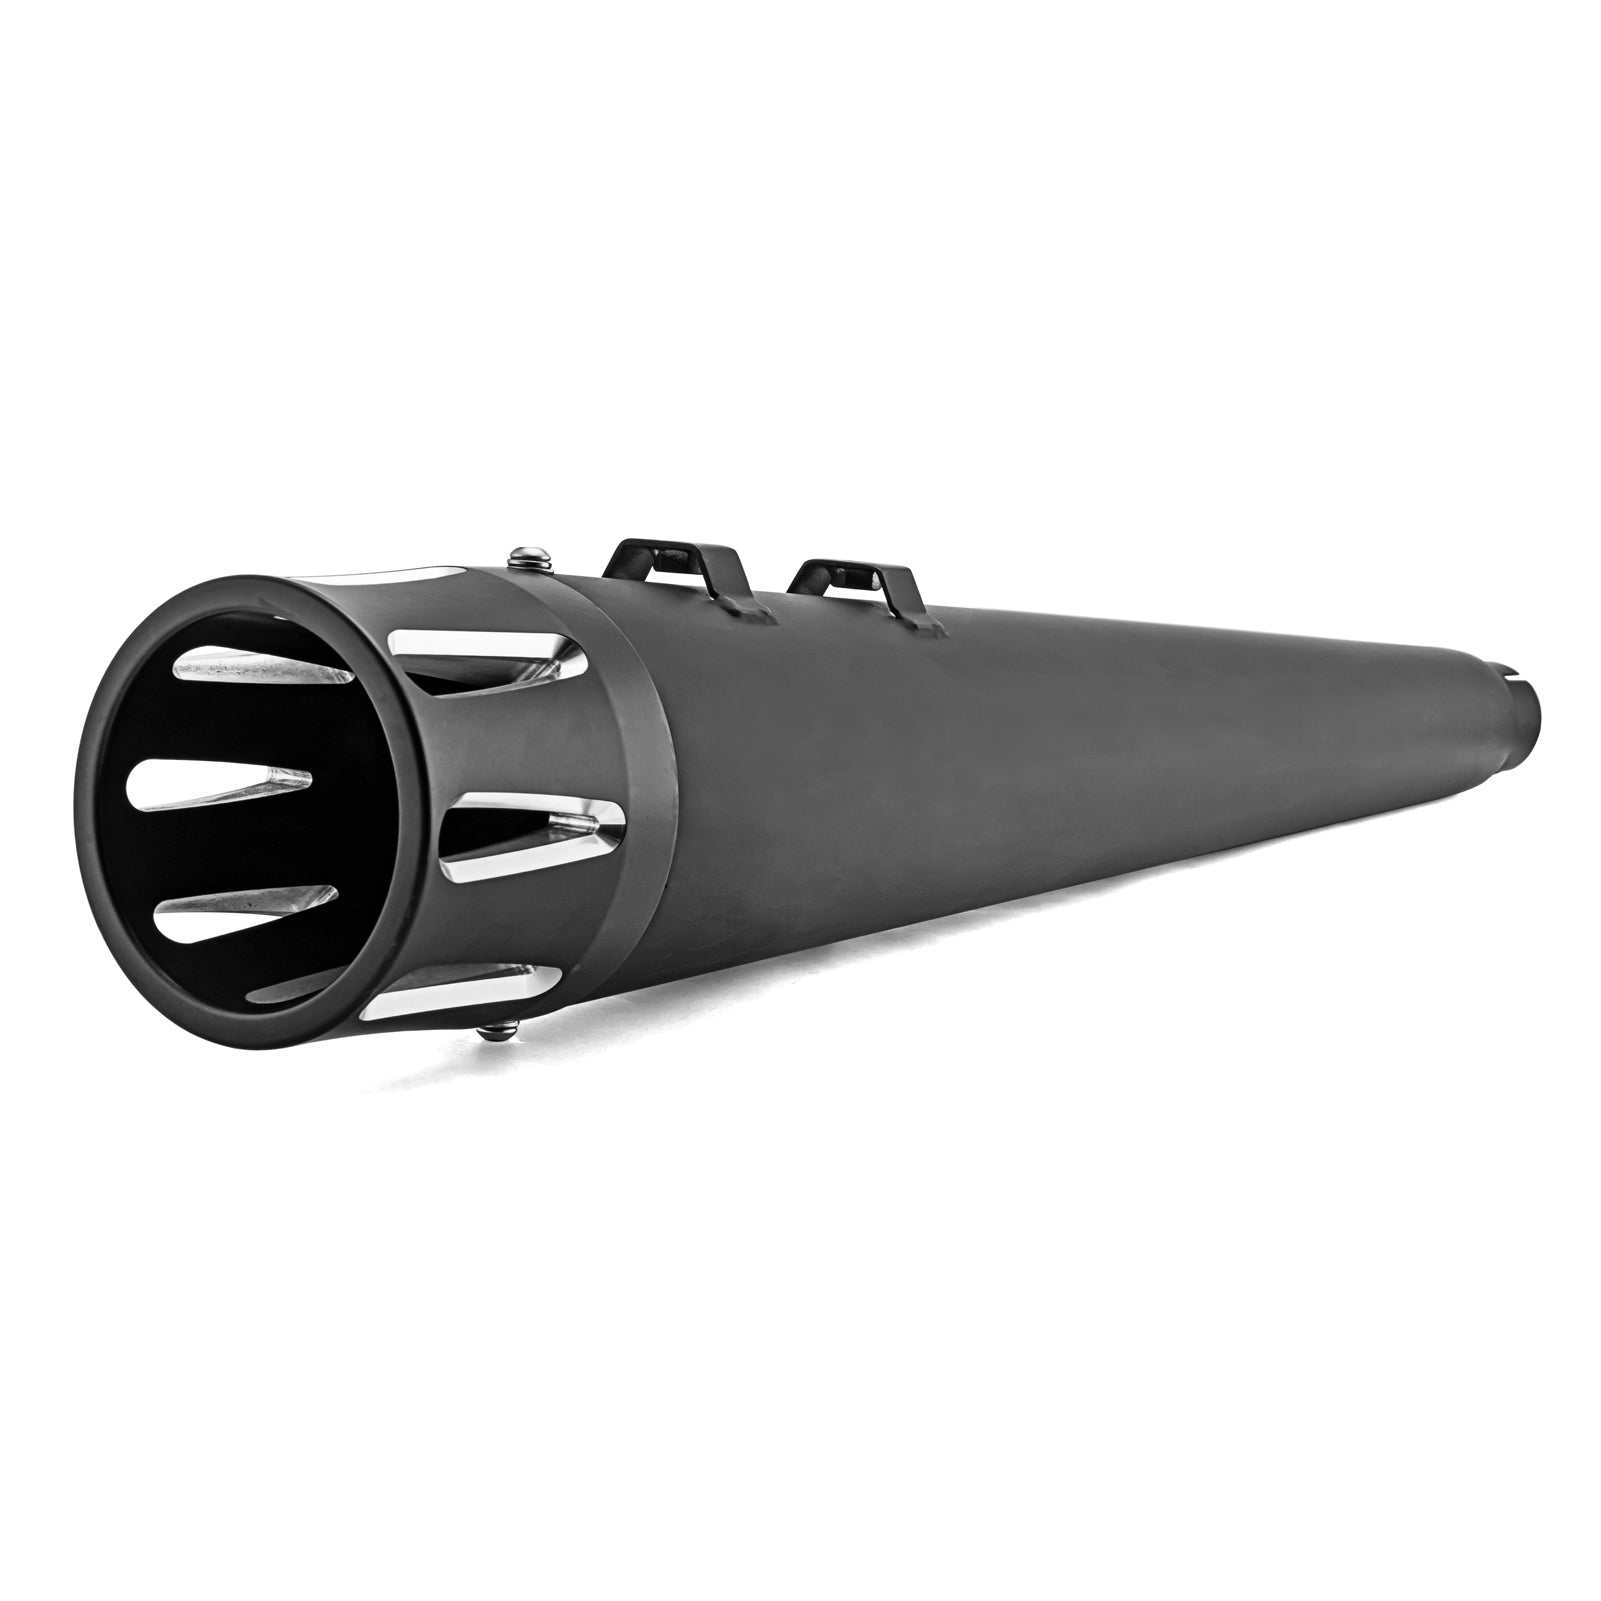 Black 4" Megaphone style Slip-On Mufflers Exhaust, Exhaust Pipes For 1995-2016 Harley Davidson Touring